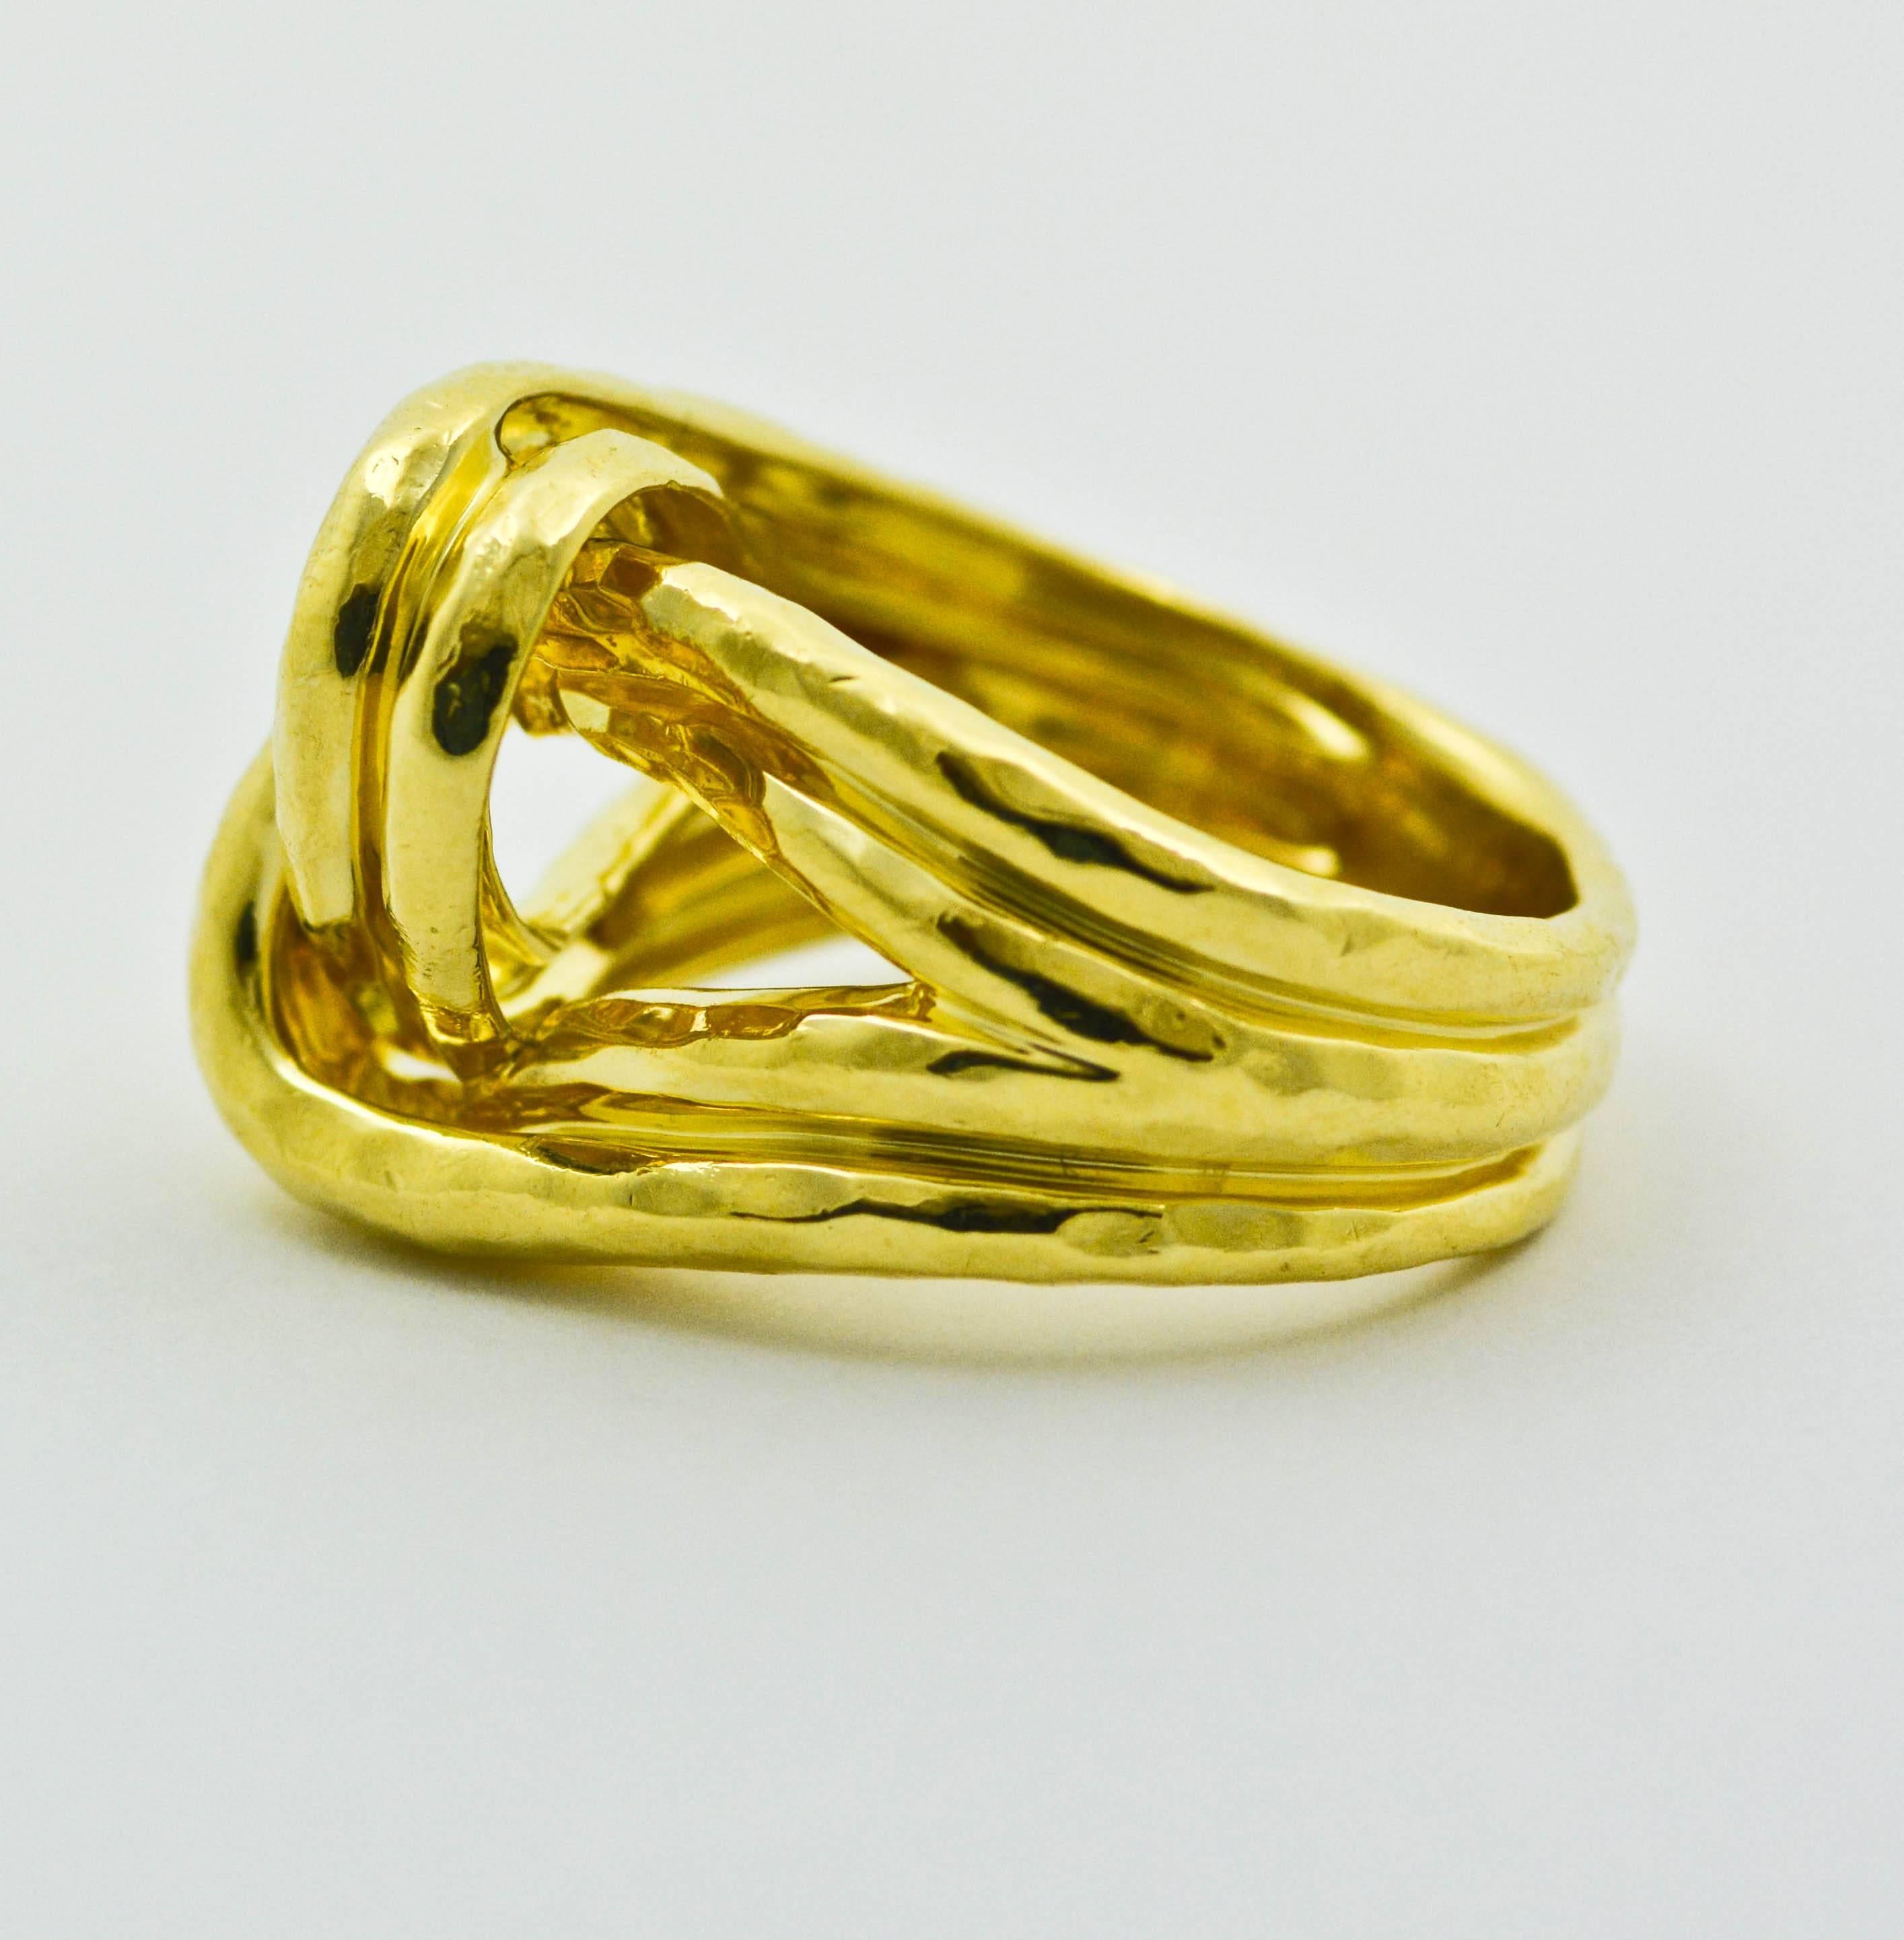 This ring is a classic Henry Dunay design. Fashioned from 18kt yellow gold, it features artistic, intertwining gold ribbons that loop through and twist around each other. The surface is highly polished and is finished with a classic Henry Dunay